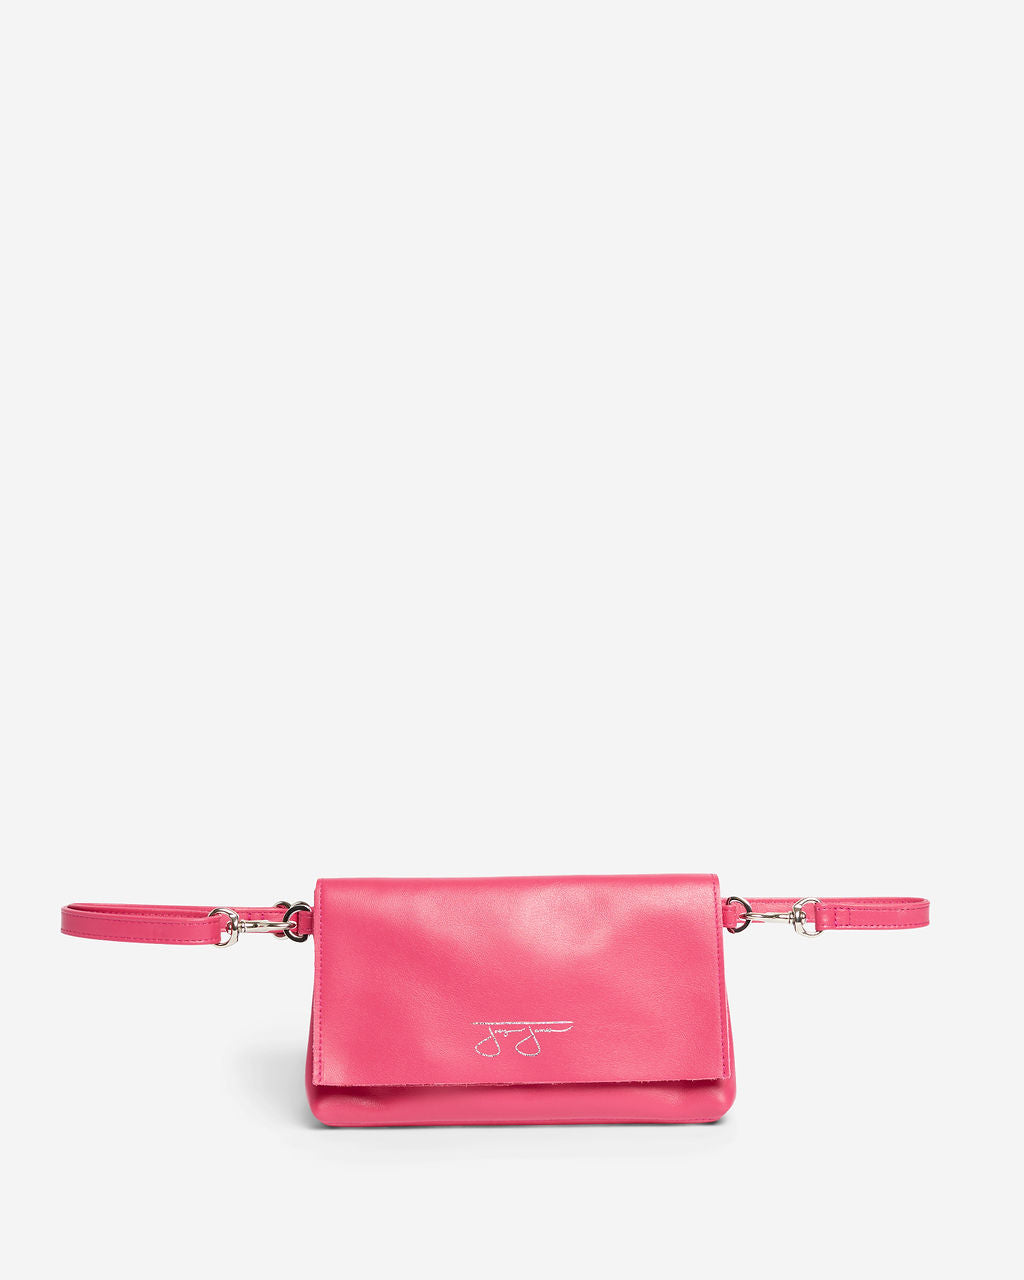 Norma Hipster Bag - Raspberry  Joey James, The Label   